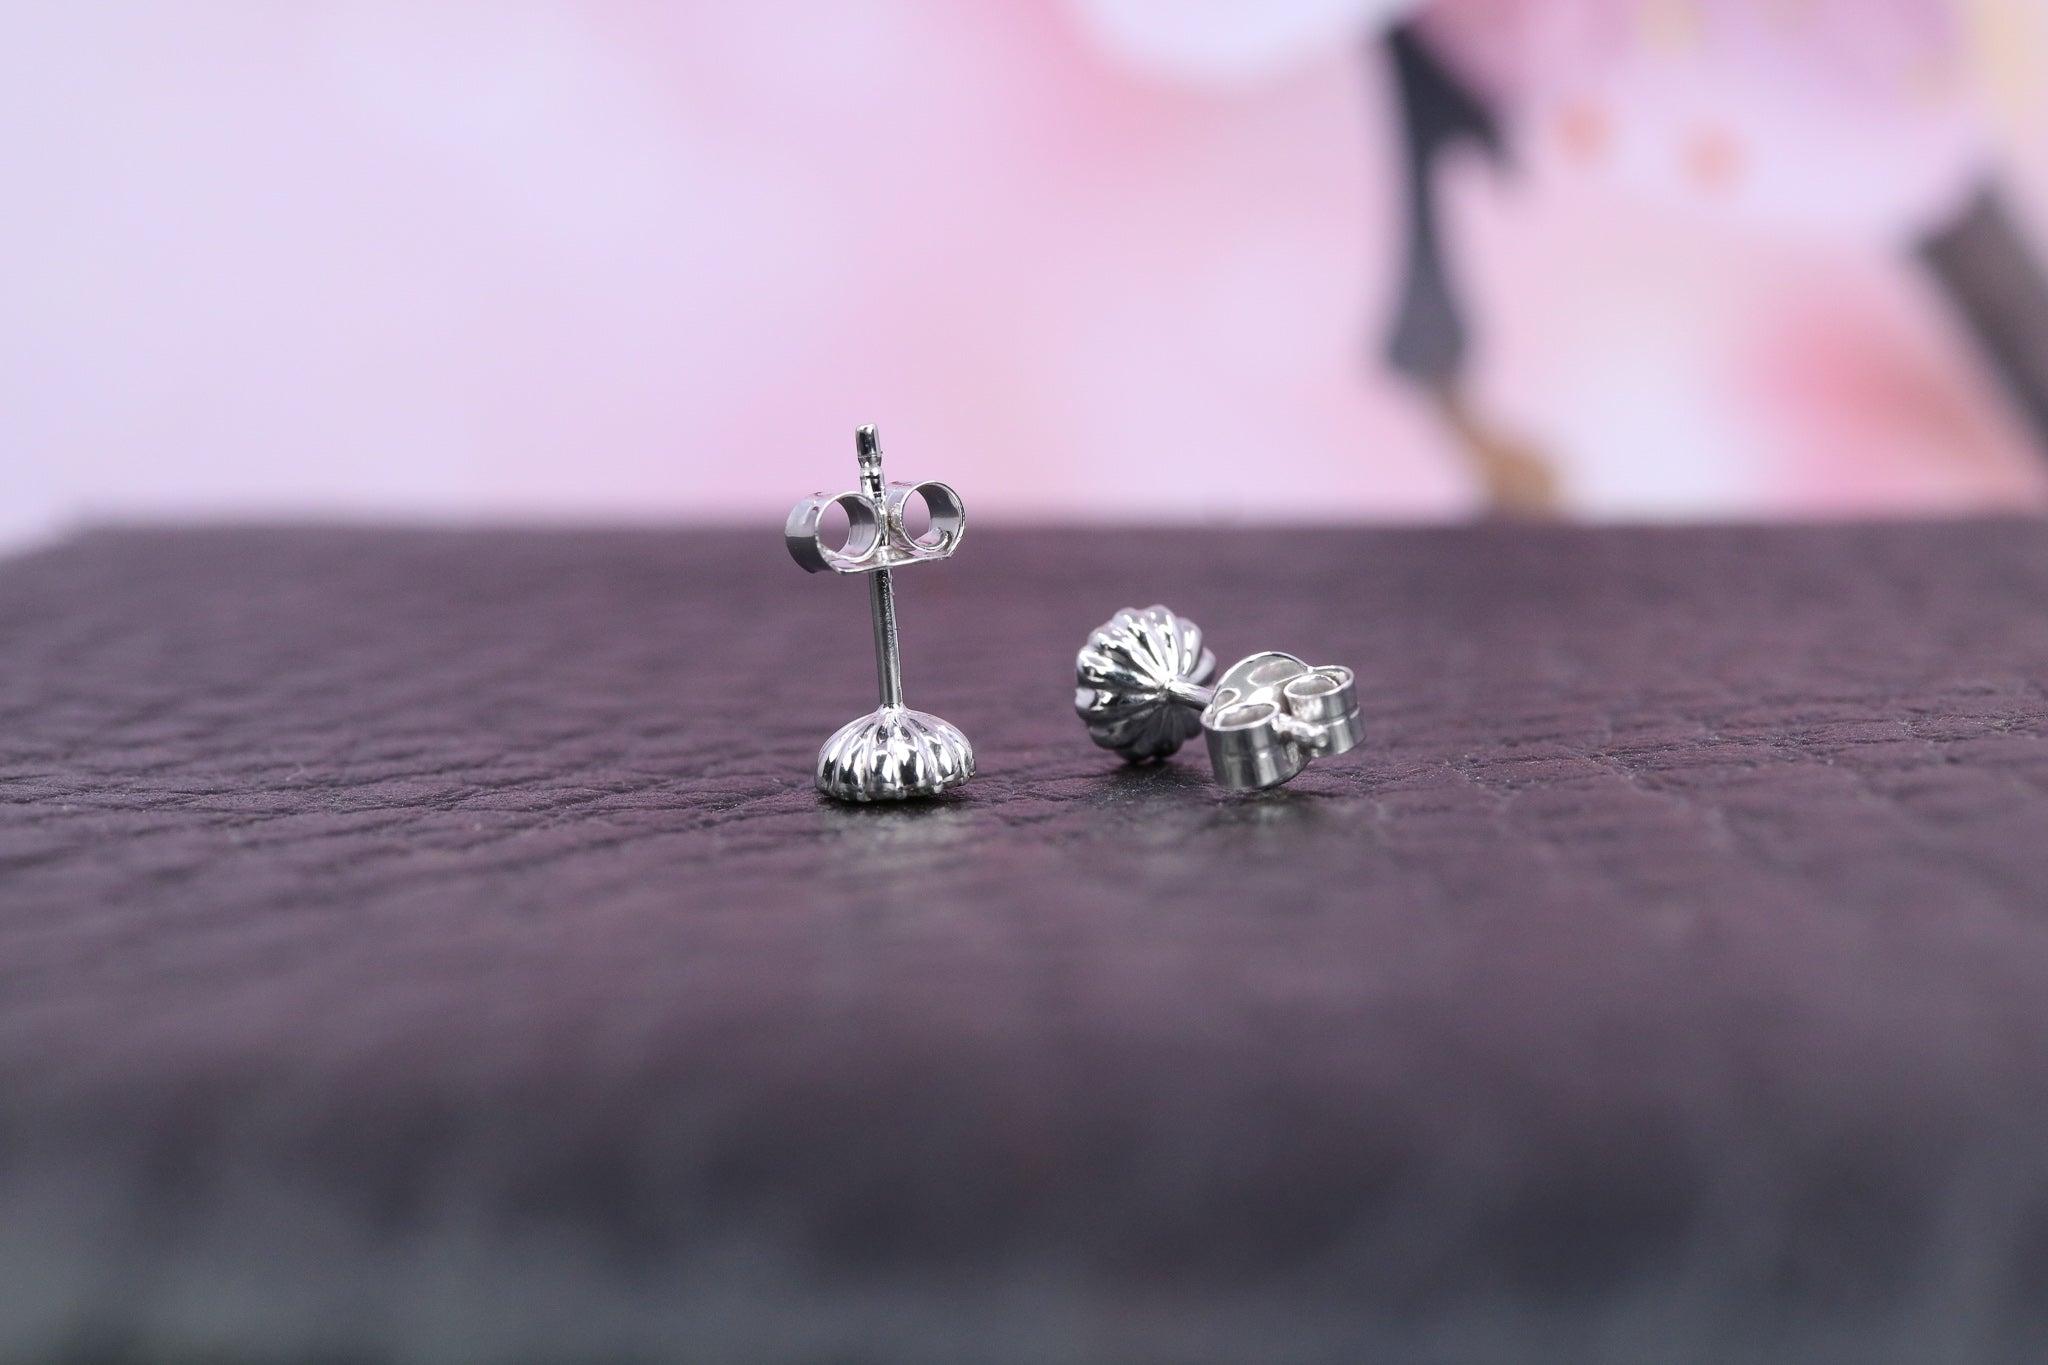 Sterling Silver & March Birthstone Earring - AK1092 - Hallmark Jewellers Formby & The Jewellers Bench Widnes